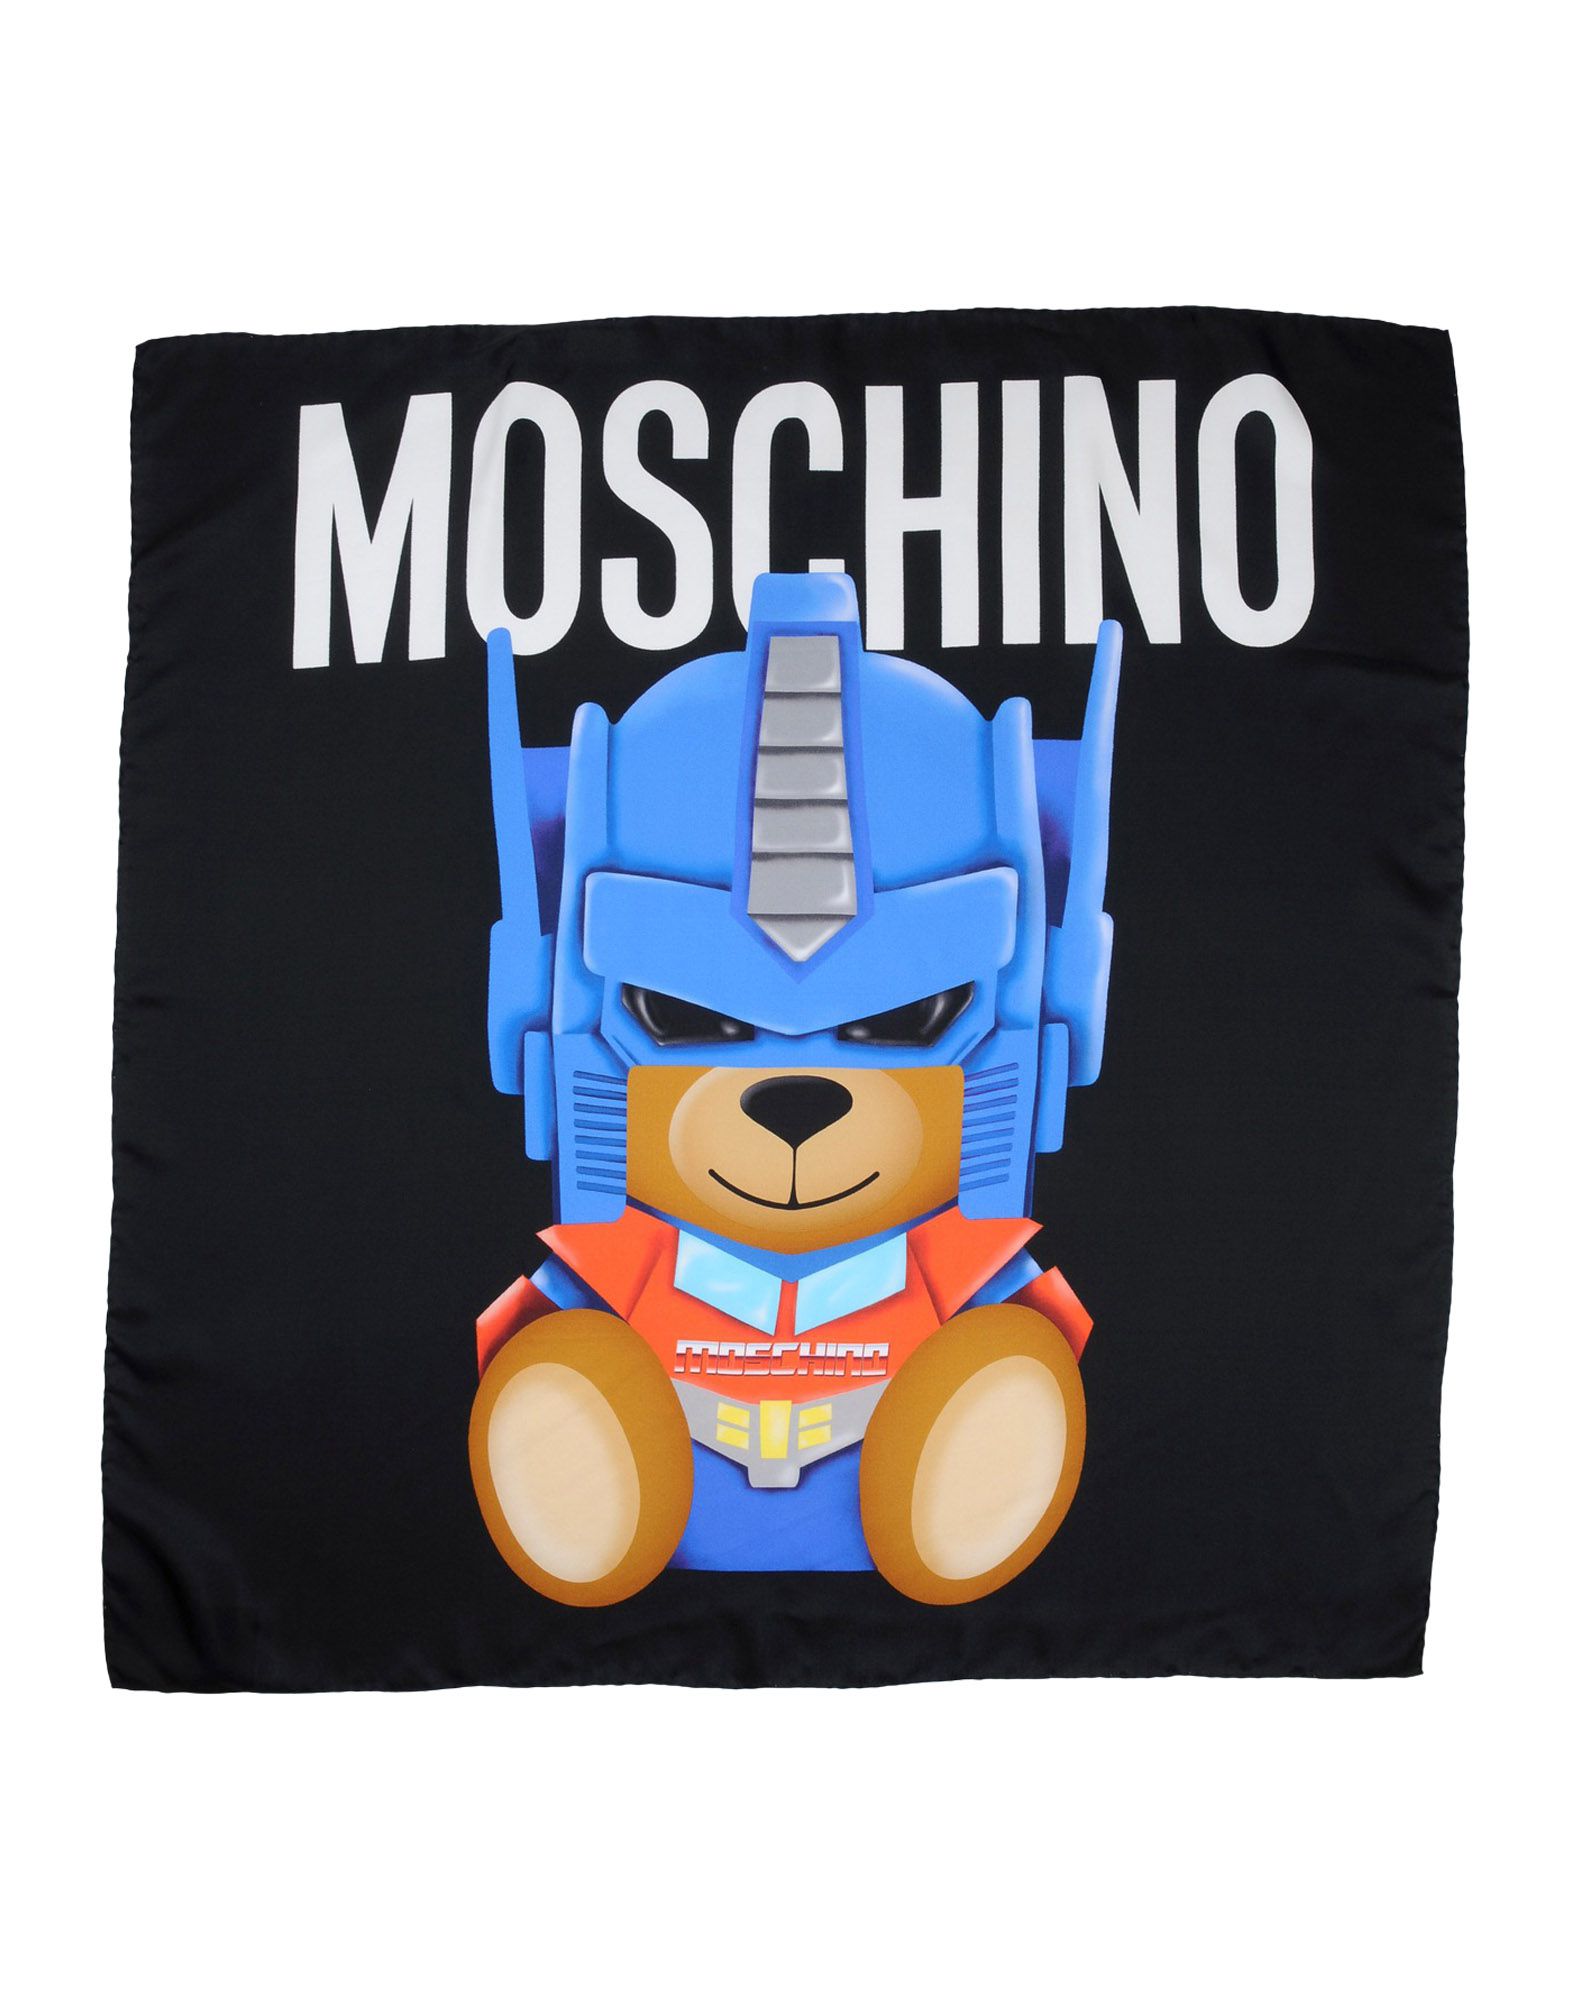 MOSCHINO Square scarf,46563963KT 1